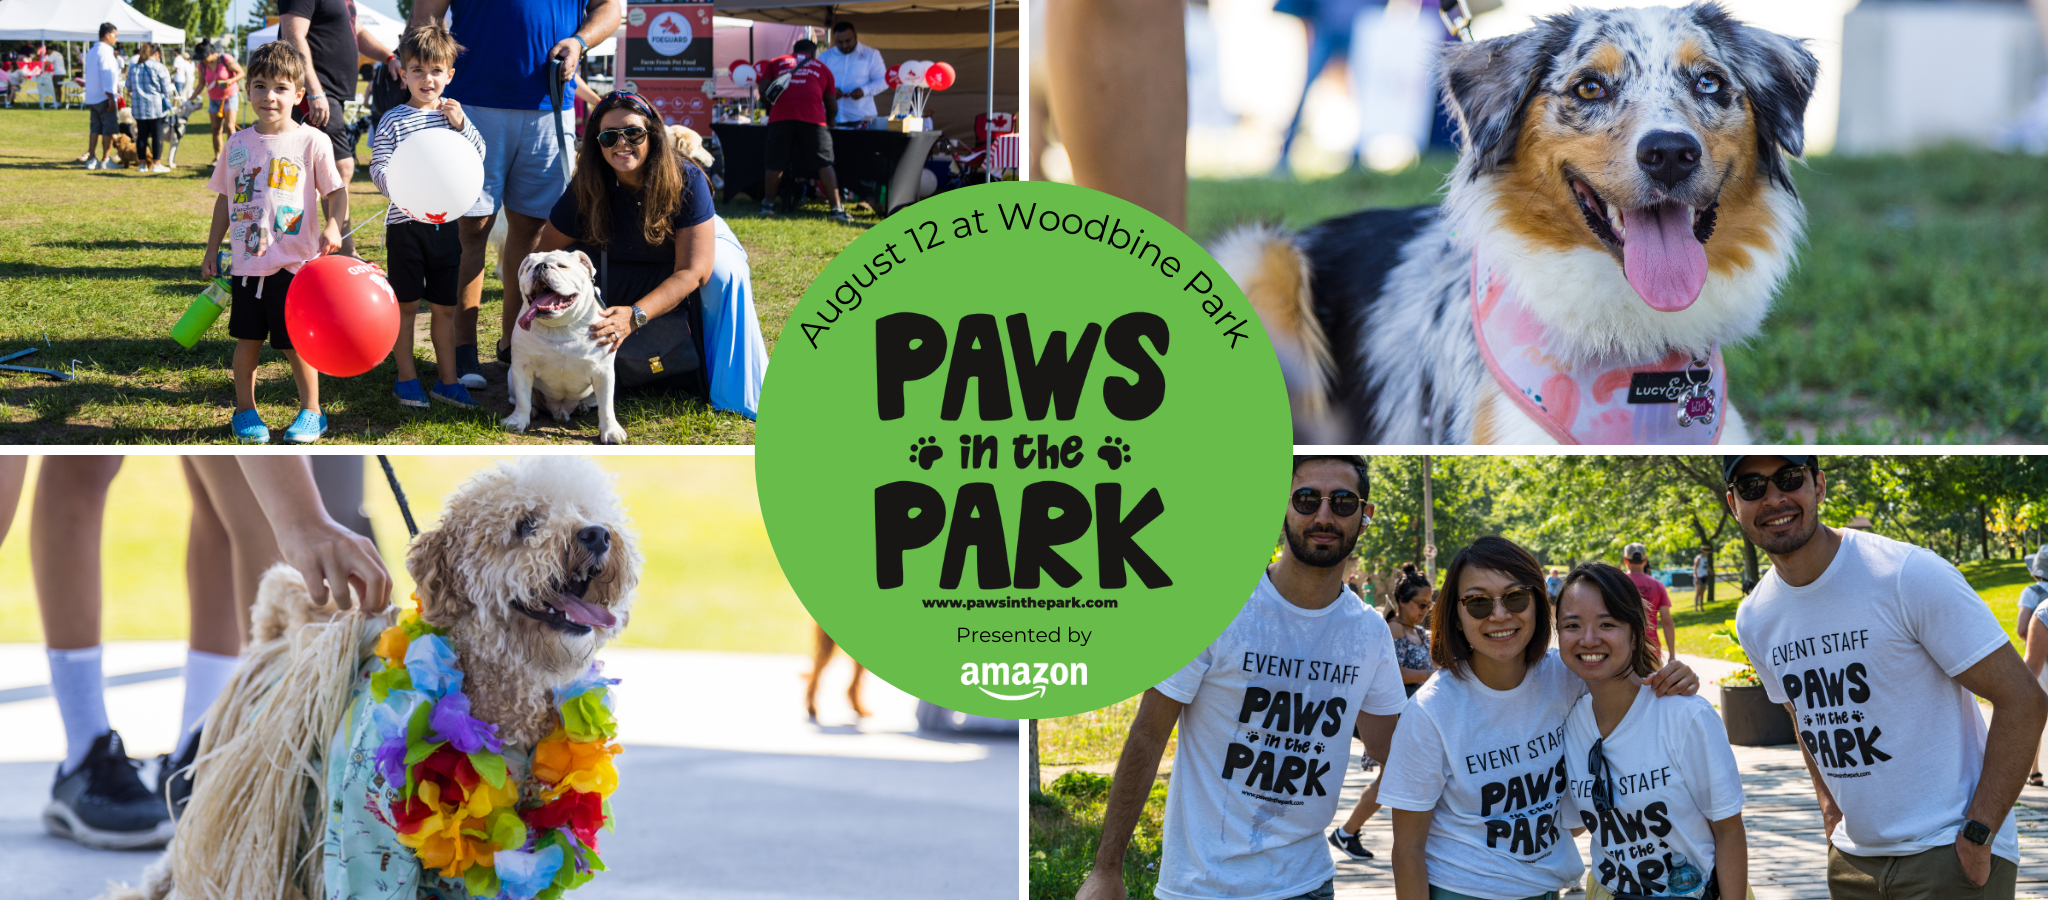 Paws In the Park - website banner image - amazon (2)